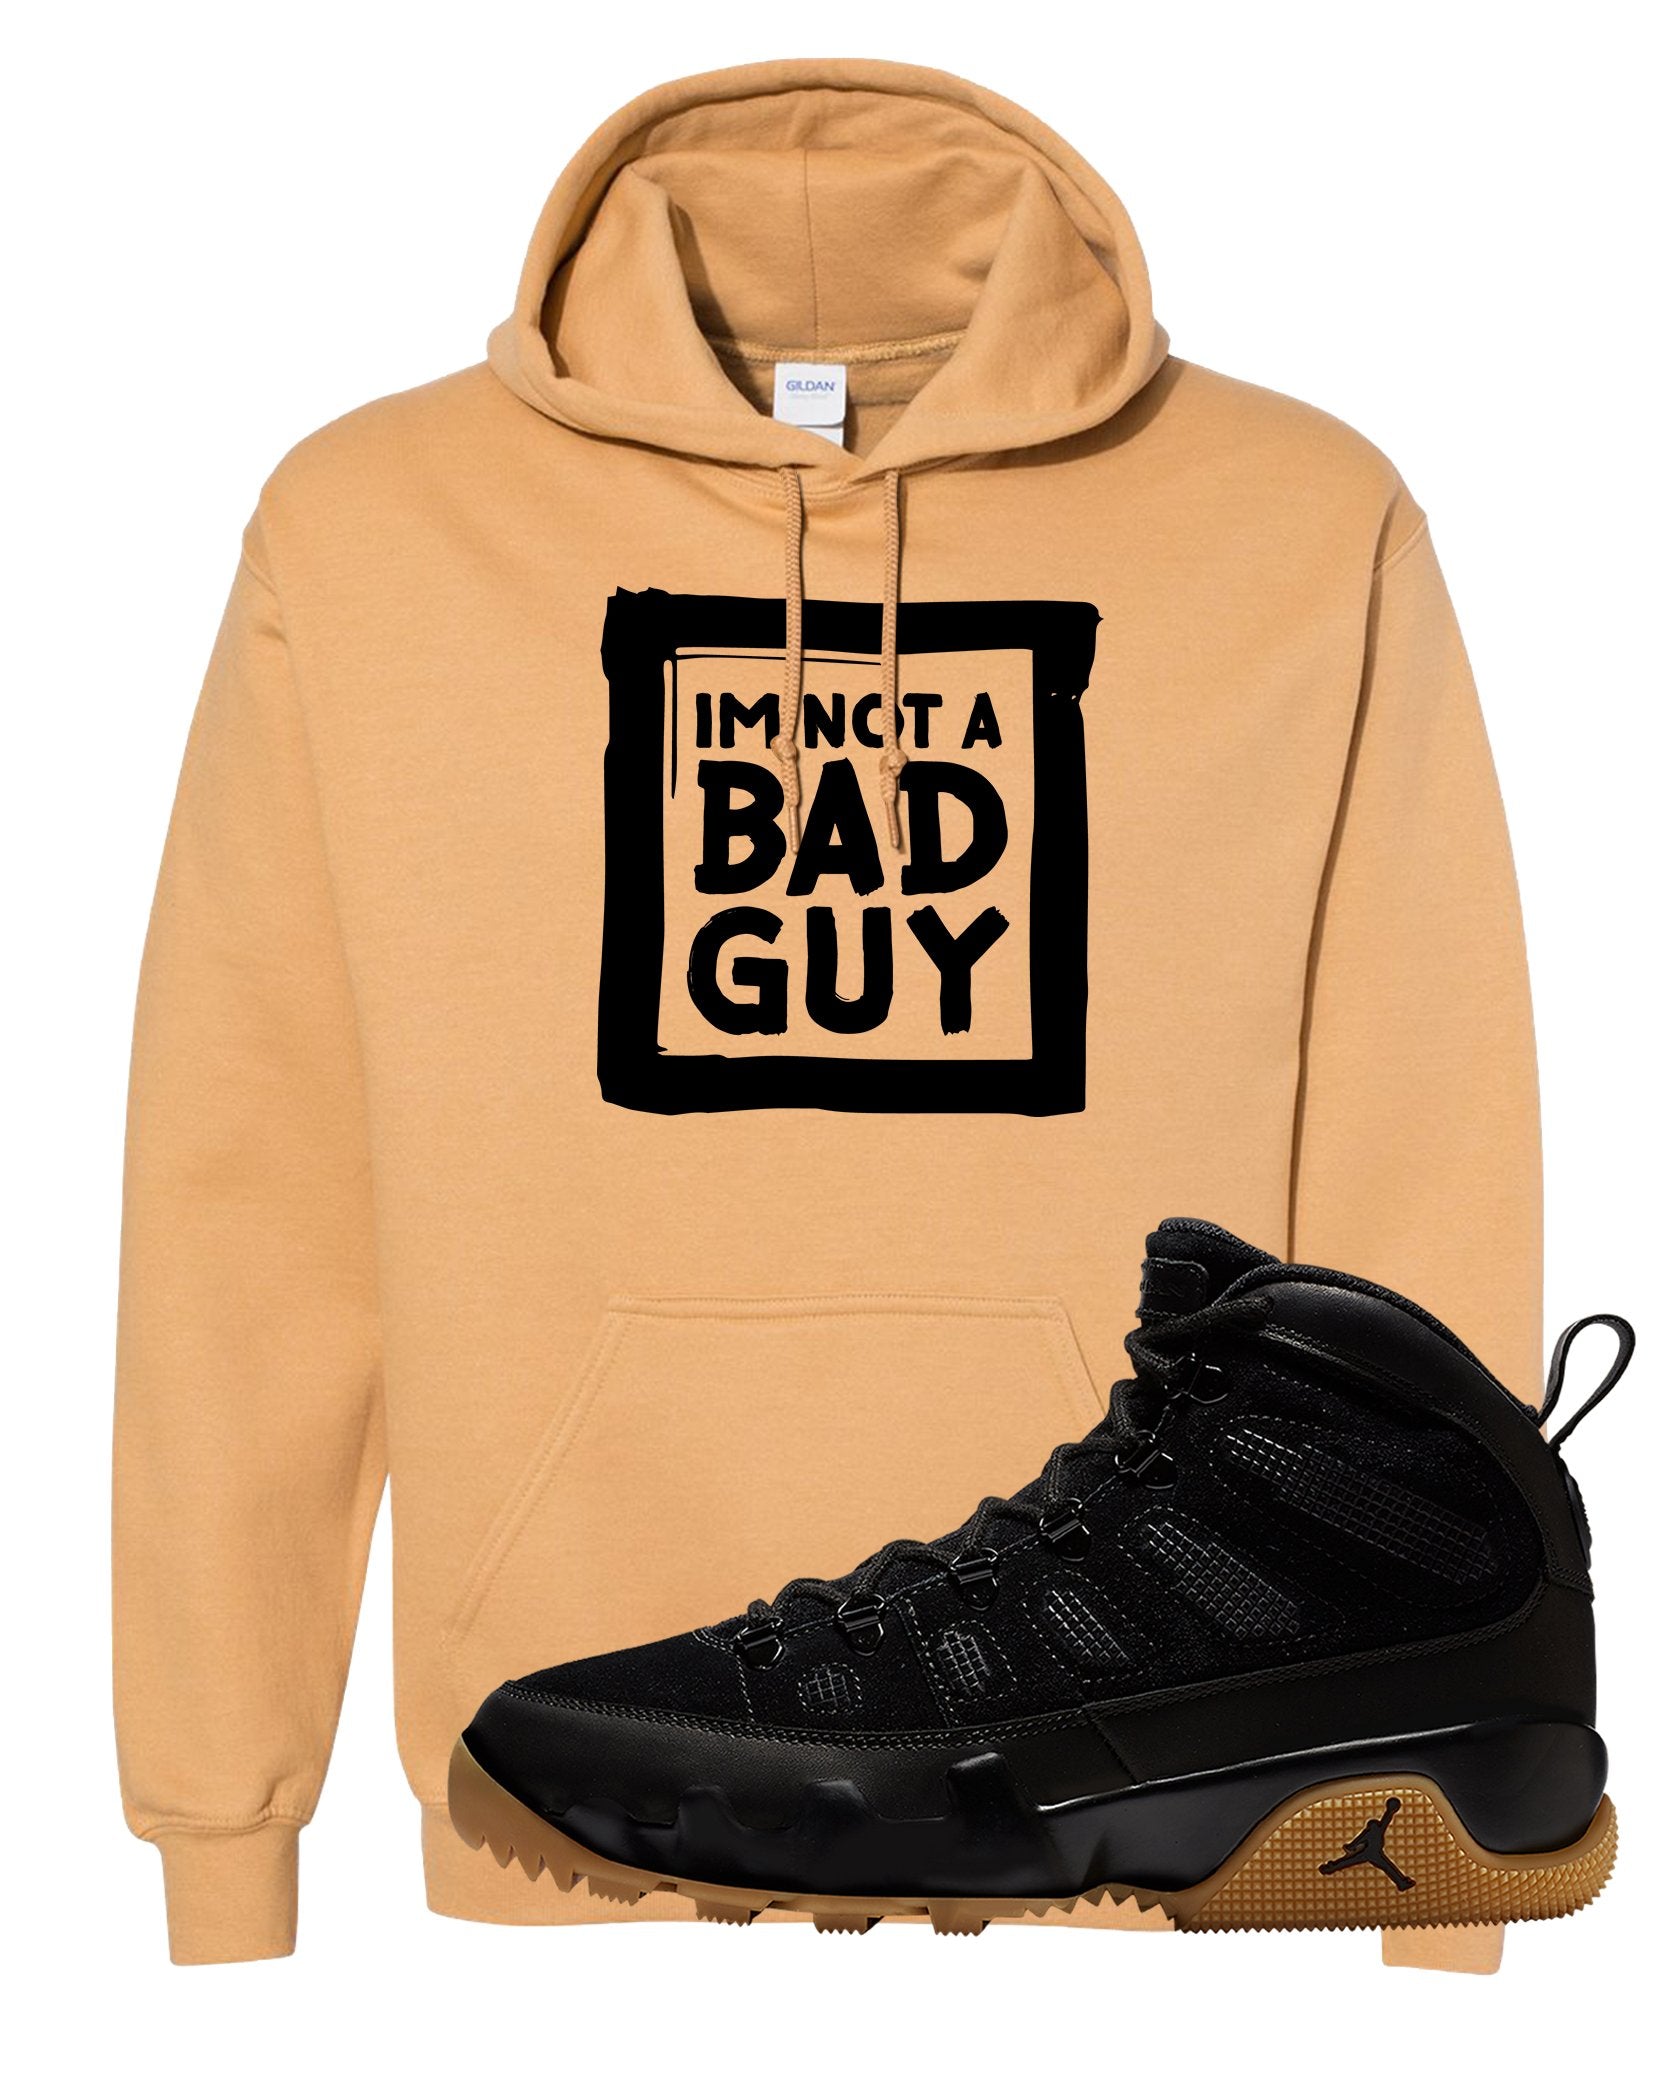 NRG Black Gum Boot 9s Hoodie | I'm Not A Bad Guy, Old Gold